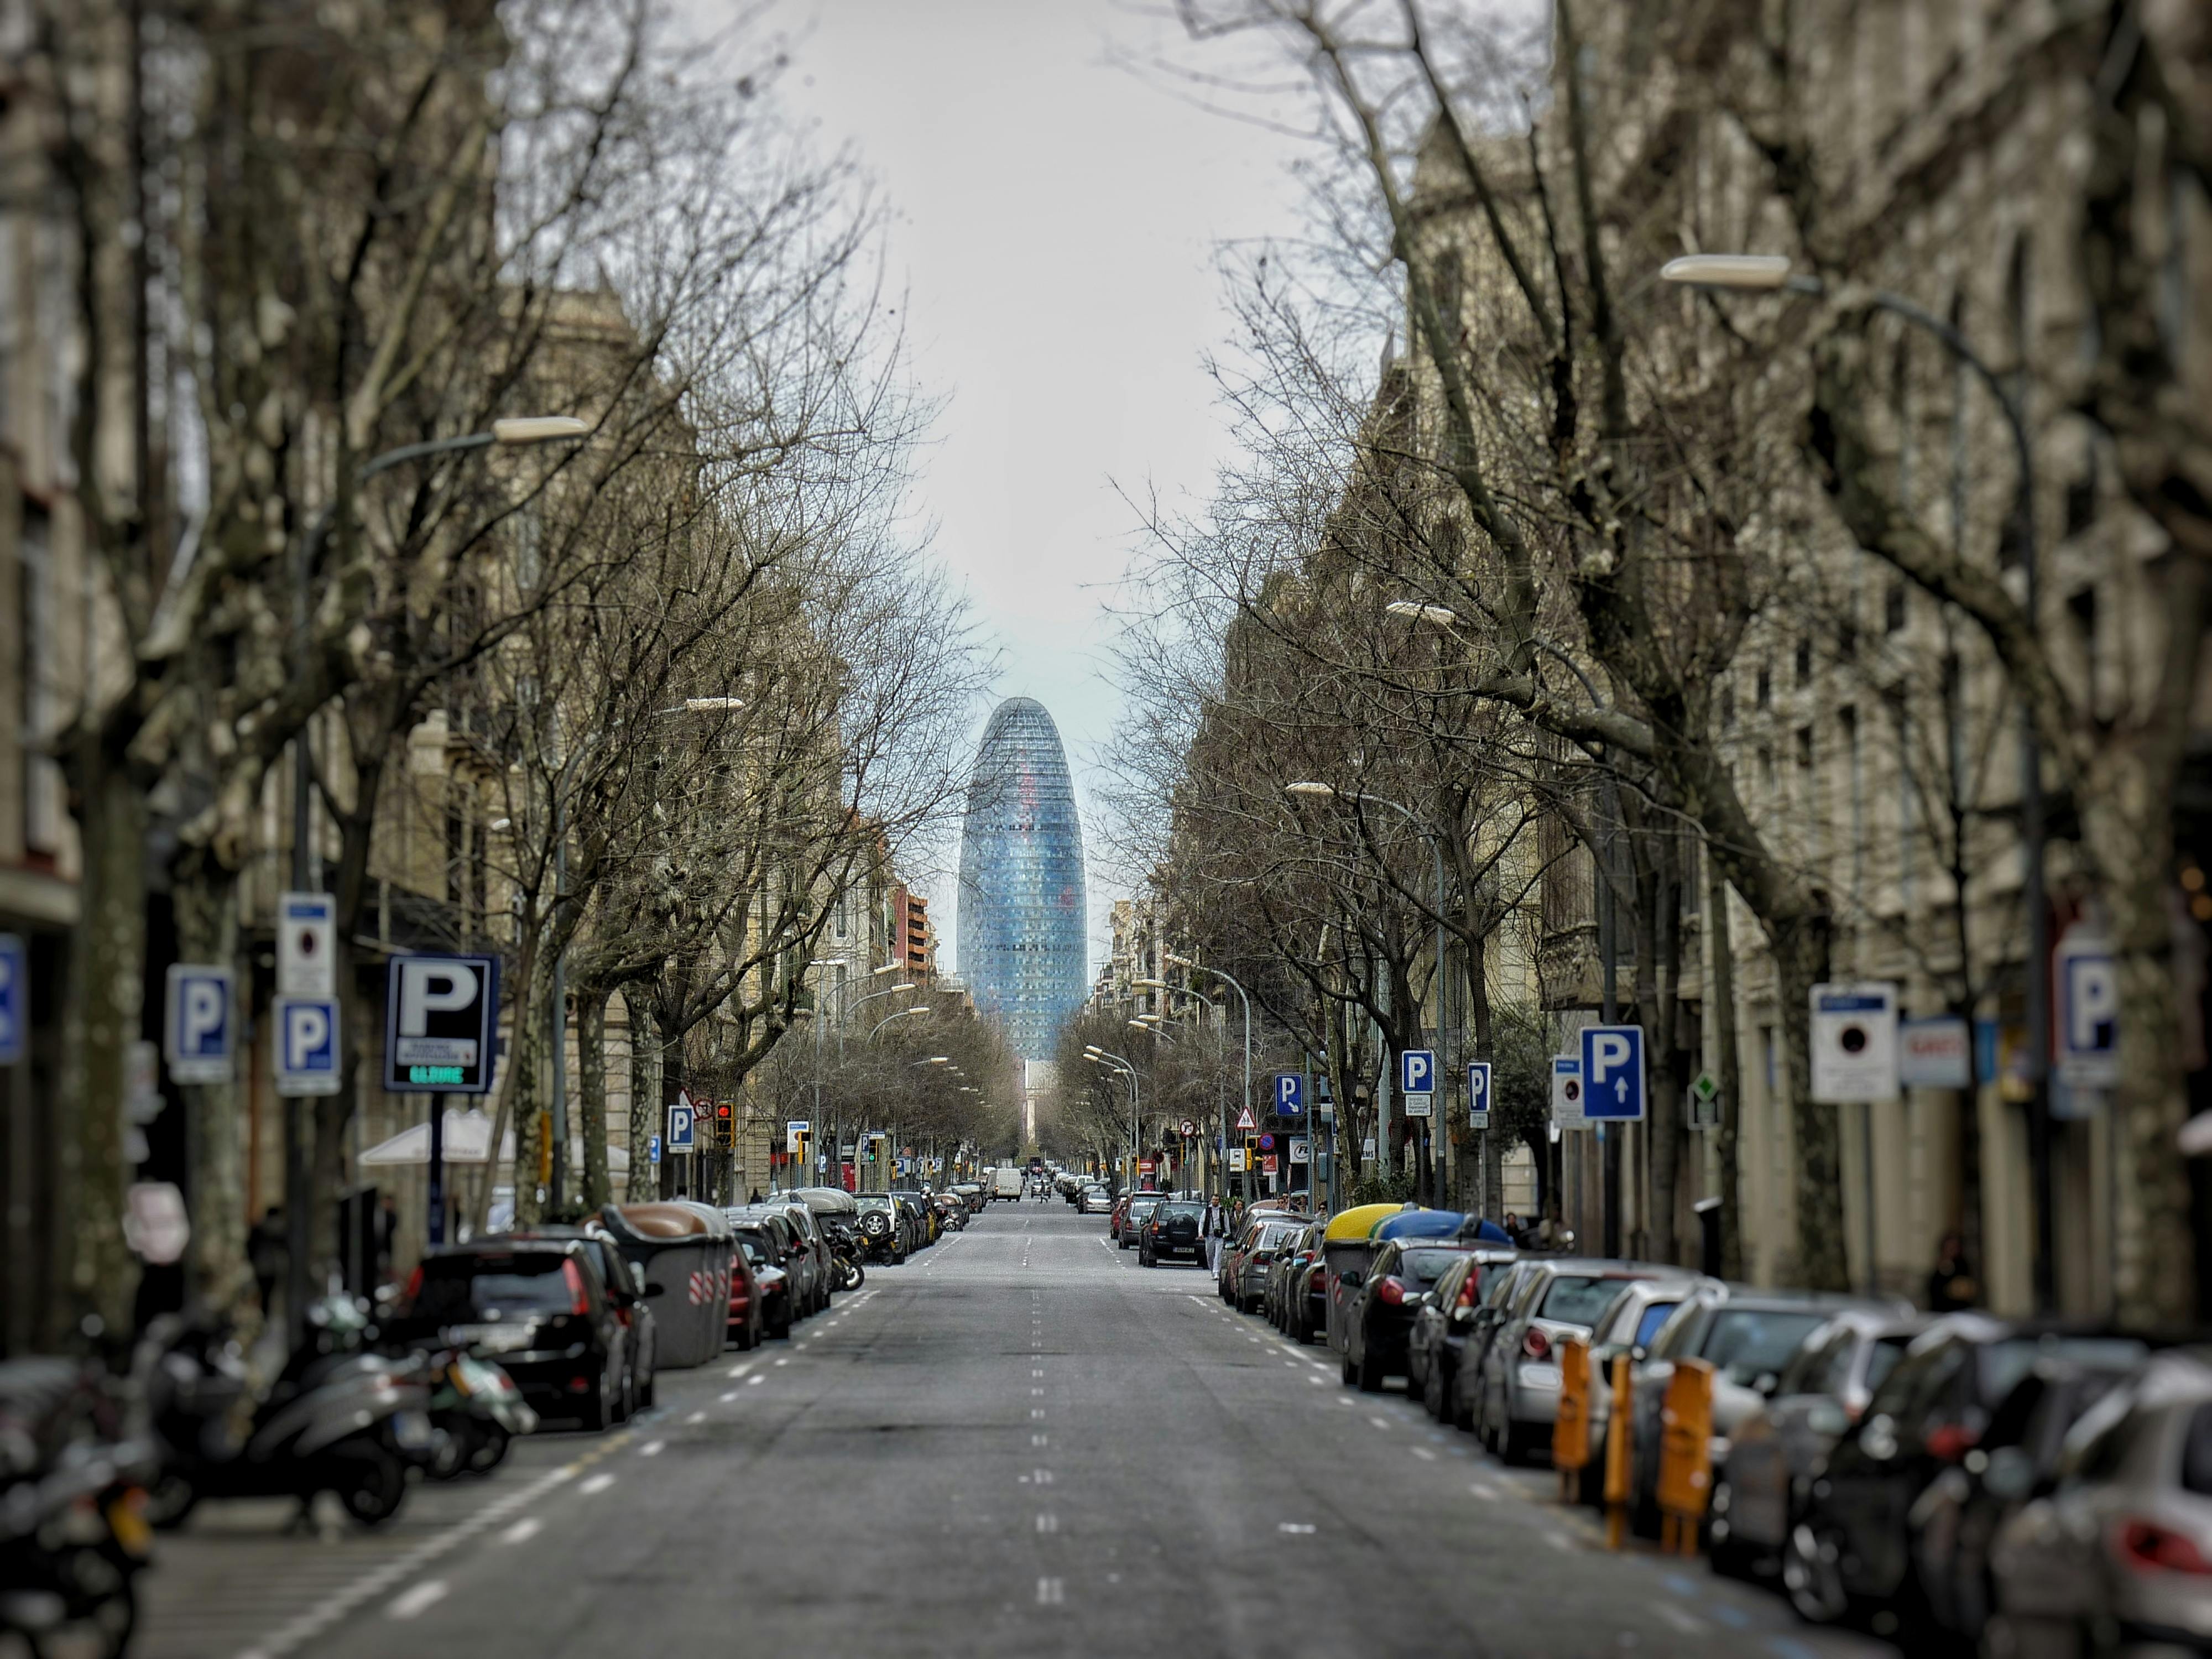 landscape photography of a street in barcelona